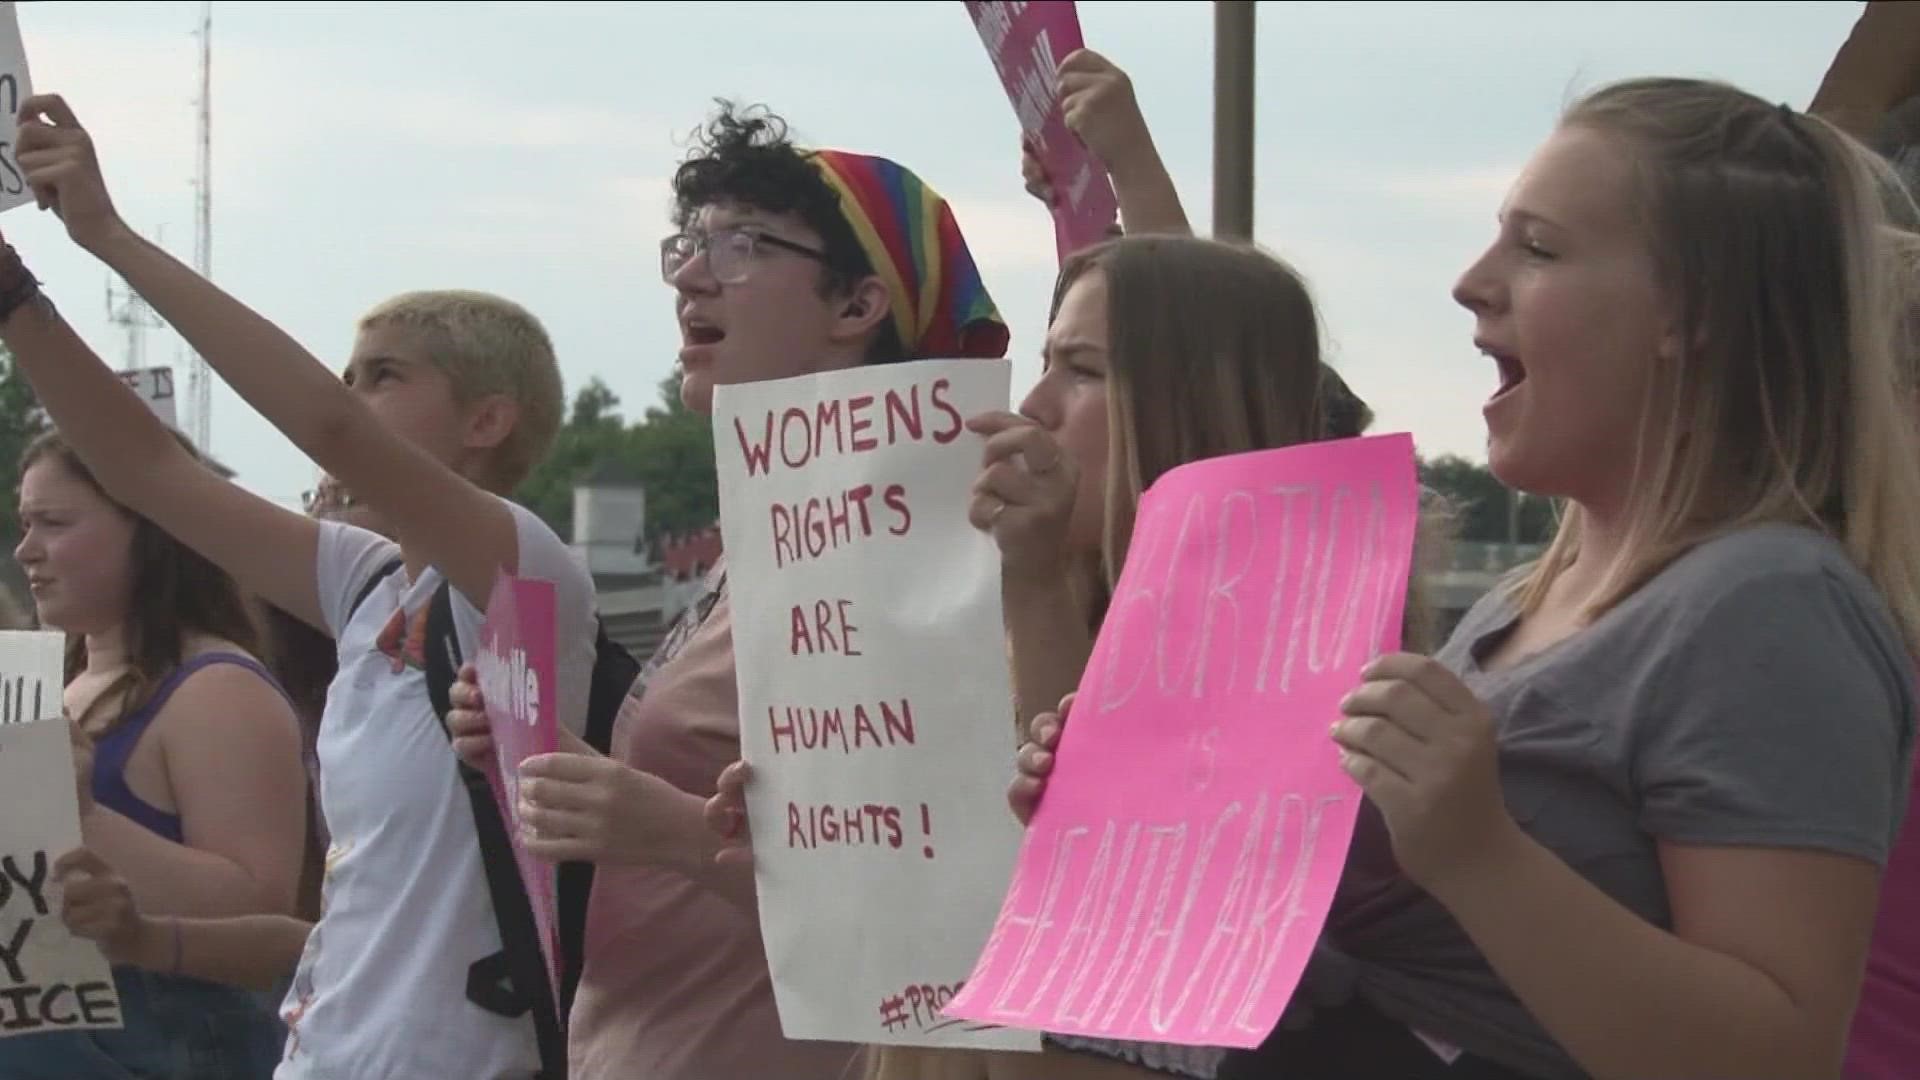 Here at home in Batavia, there was a rally for abortion rights. About 100 people made sure their voices were heard.